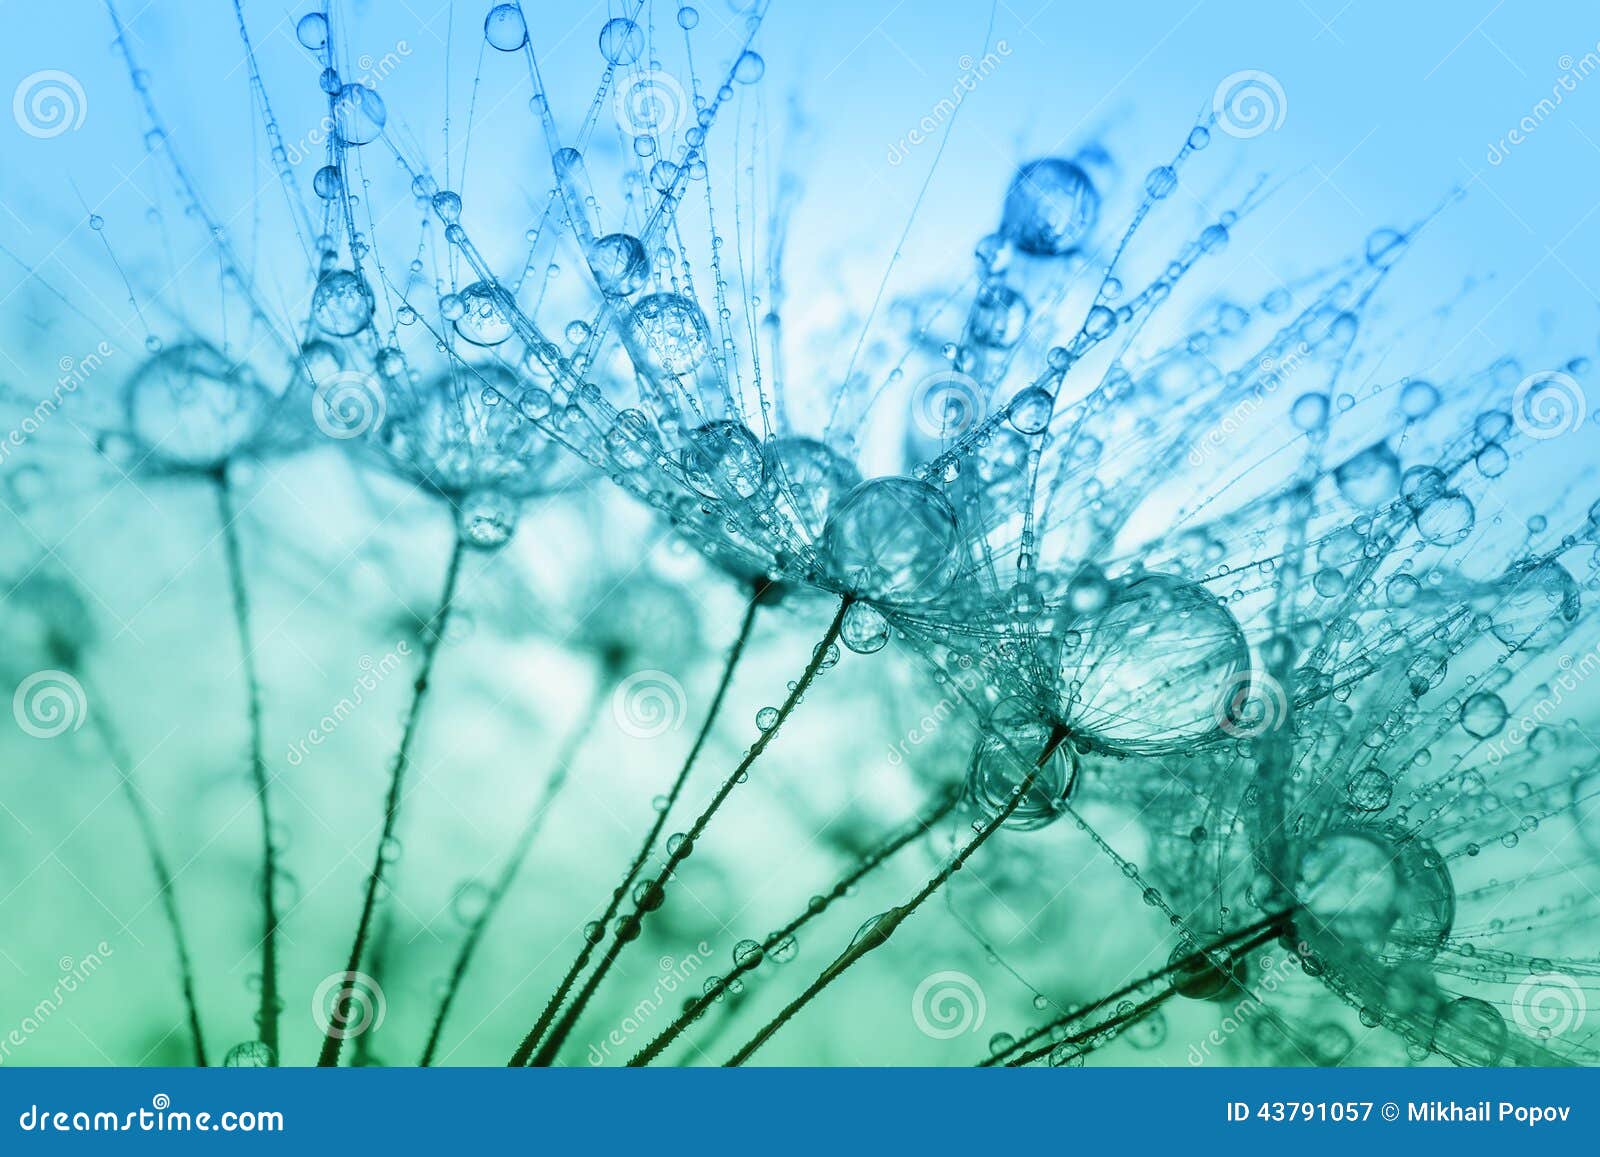 abstract macro photo of plant seeds with water